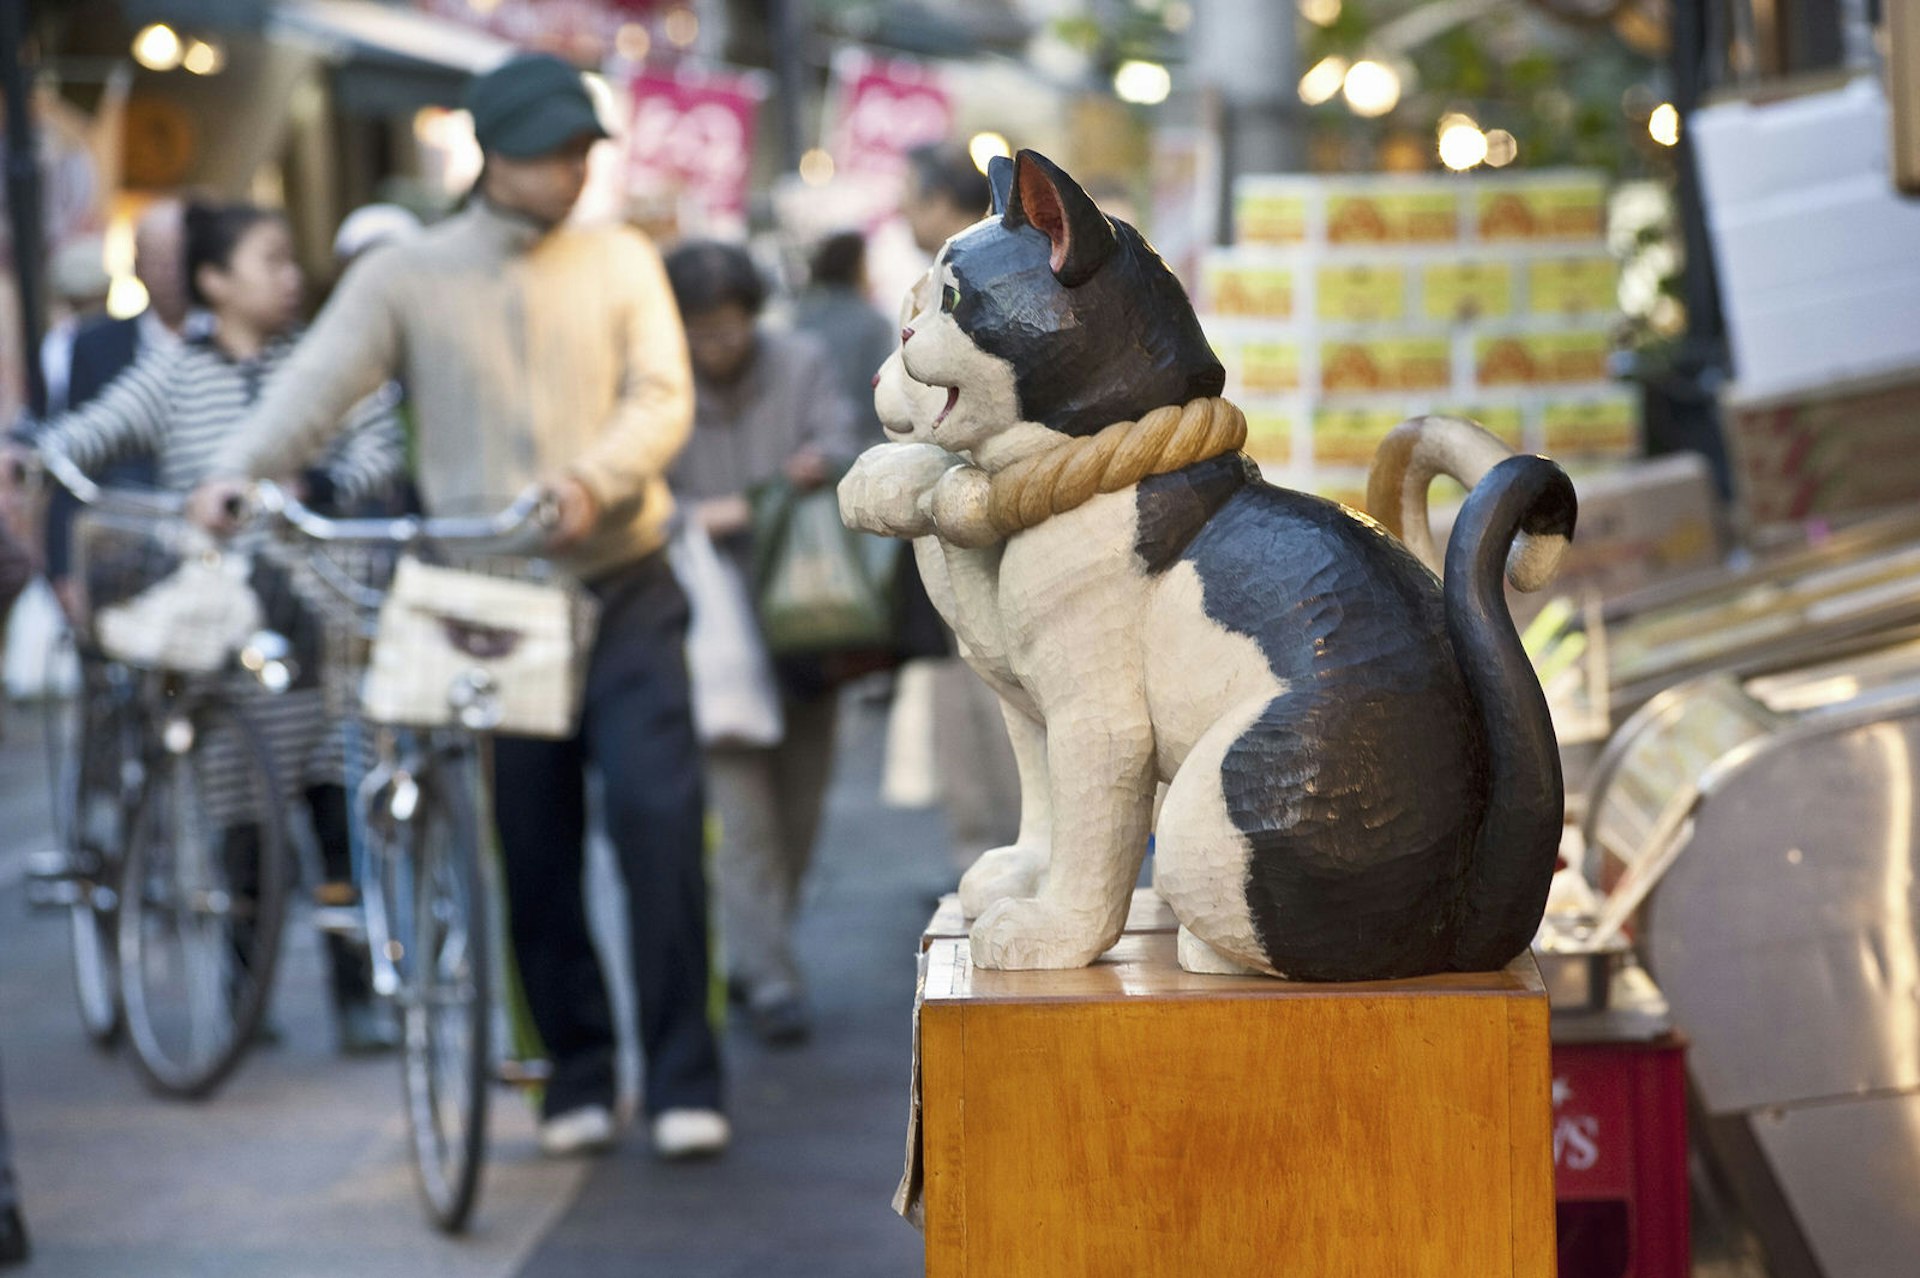 A small statue of a cat stands in front of a stall along Yanaka Ginza market street, with a group of shoppers with bicycles blurred in the background